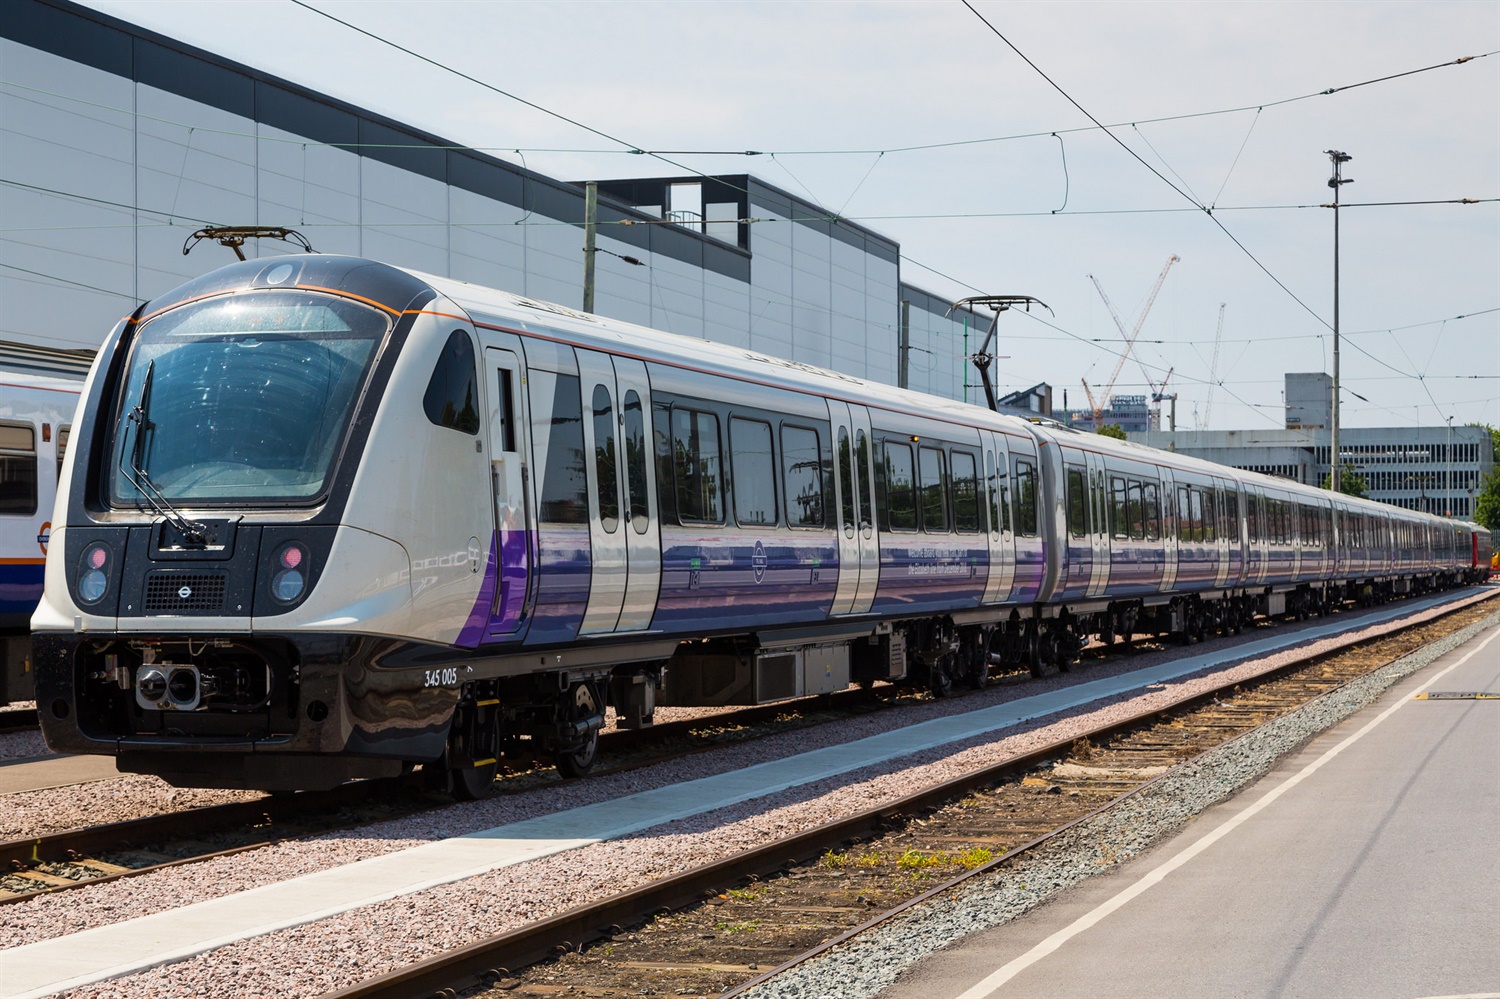 New Elizabeth Line trains bugged by insect problem in early testing